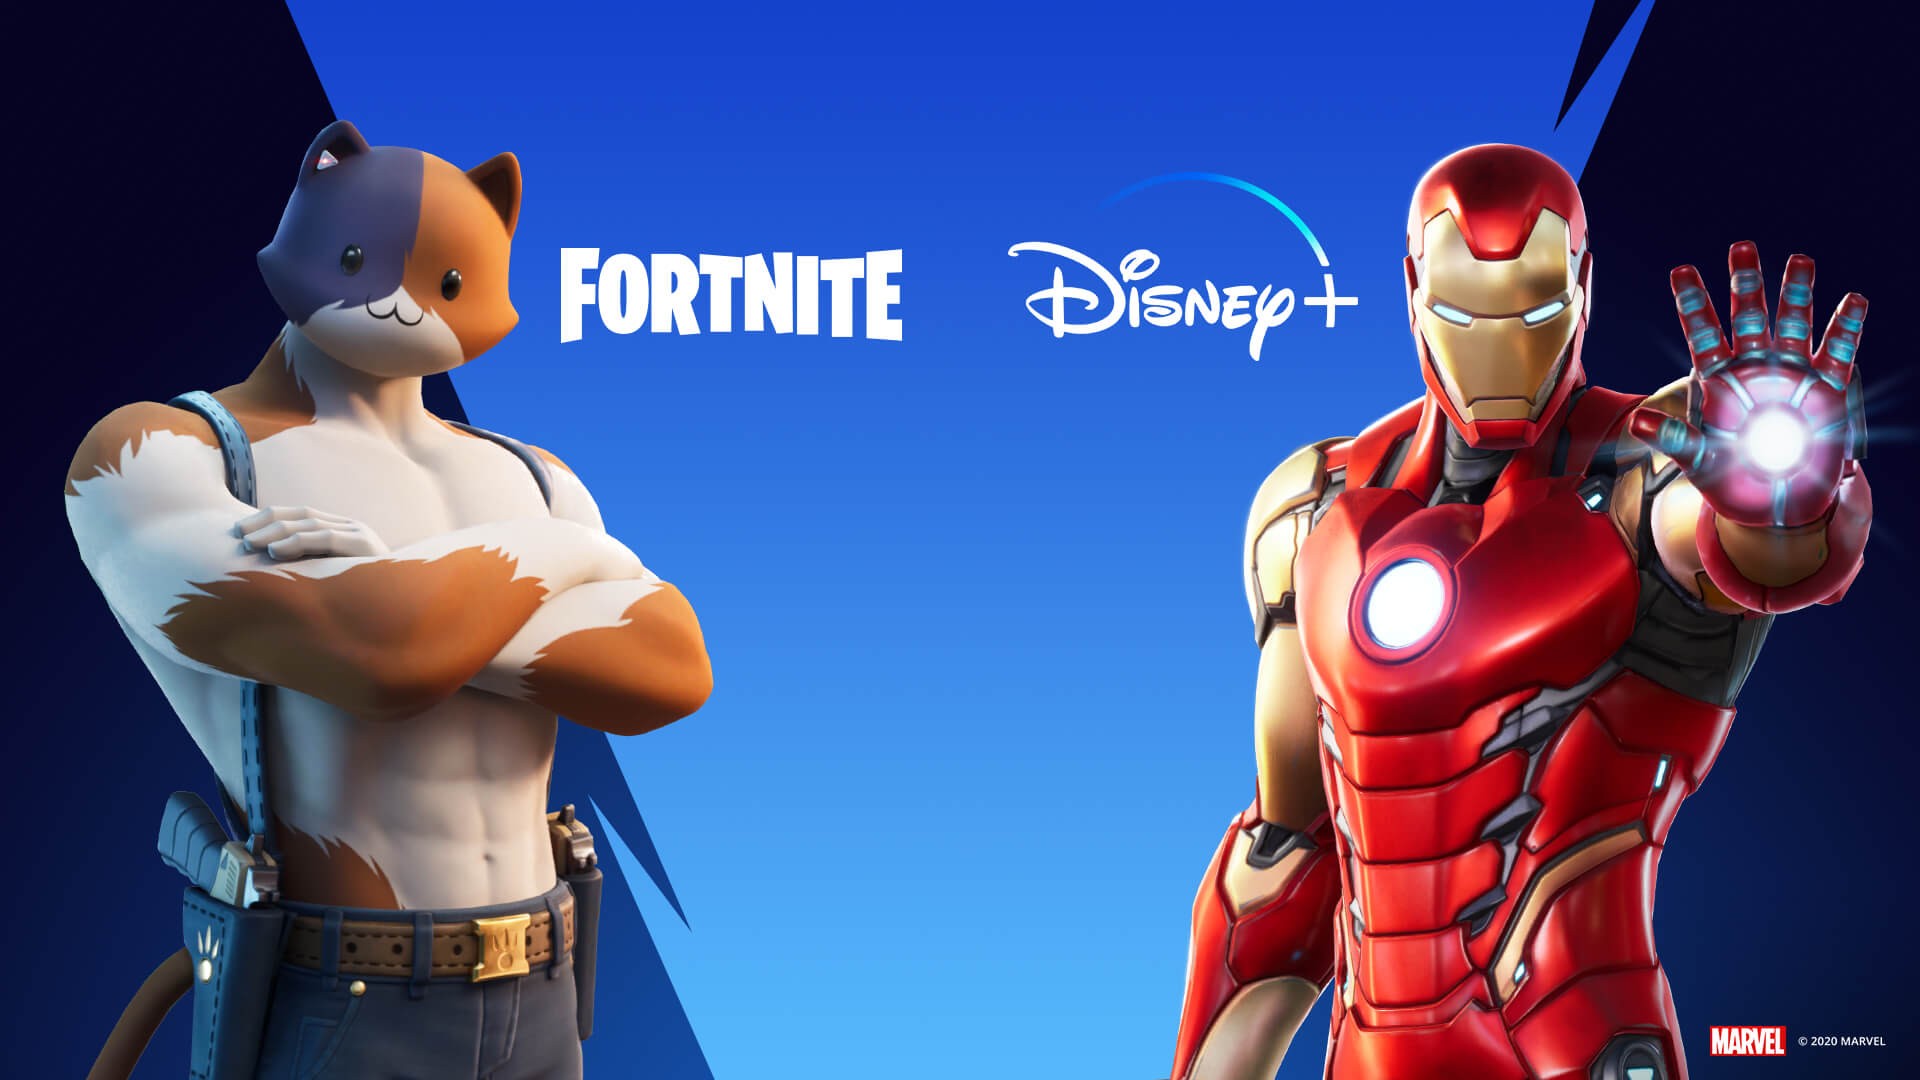  Fortnite is giving players two months of Disney Plus for making real-money purchases 